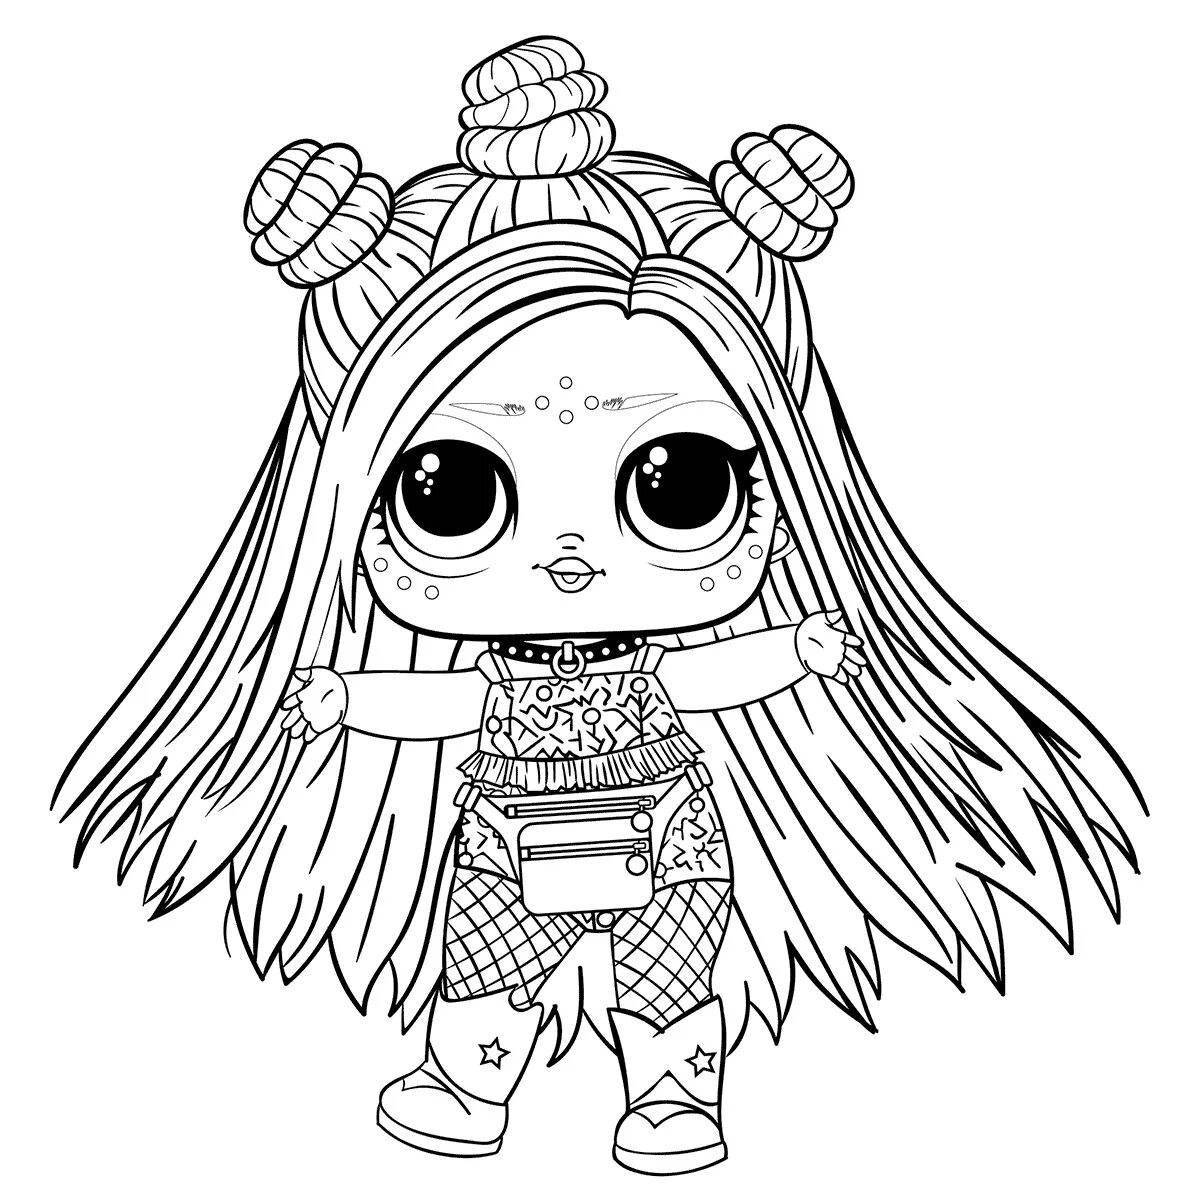 Bright doll lol teen coloring page